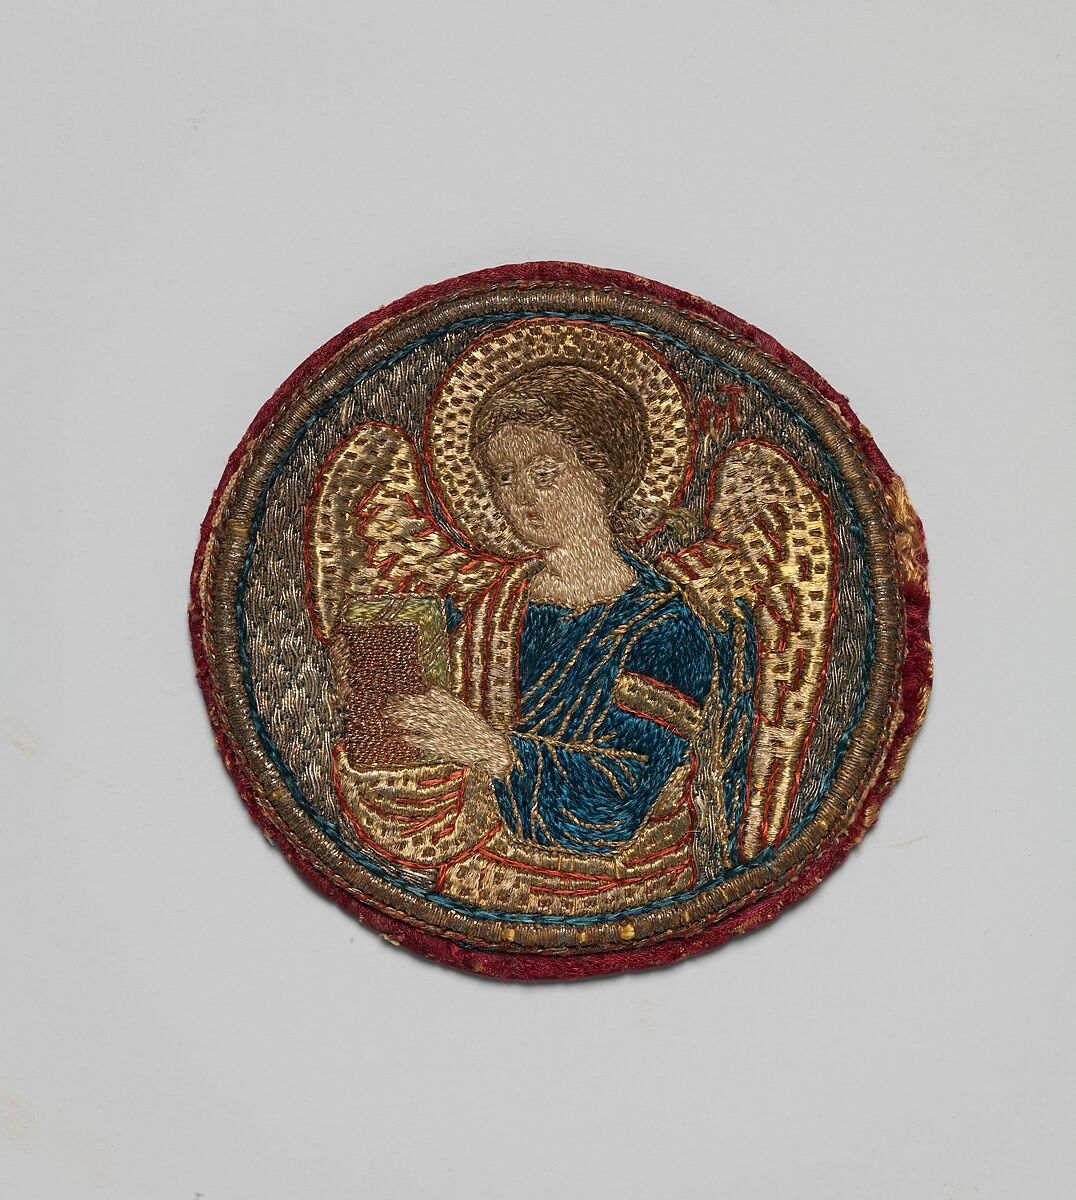 Embroidered Medallion, Silk and metal thread embroidery on a foundation of linen plain weave, Byzantine 